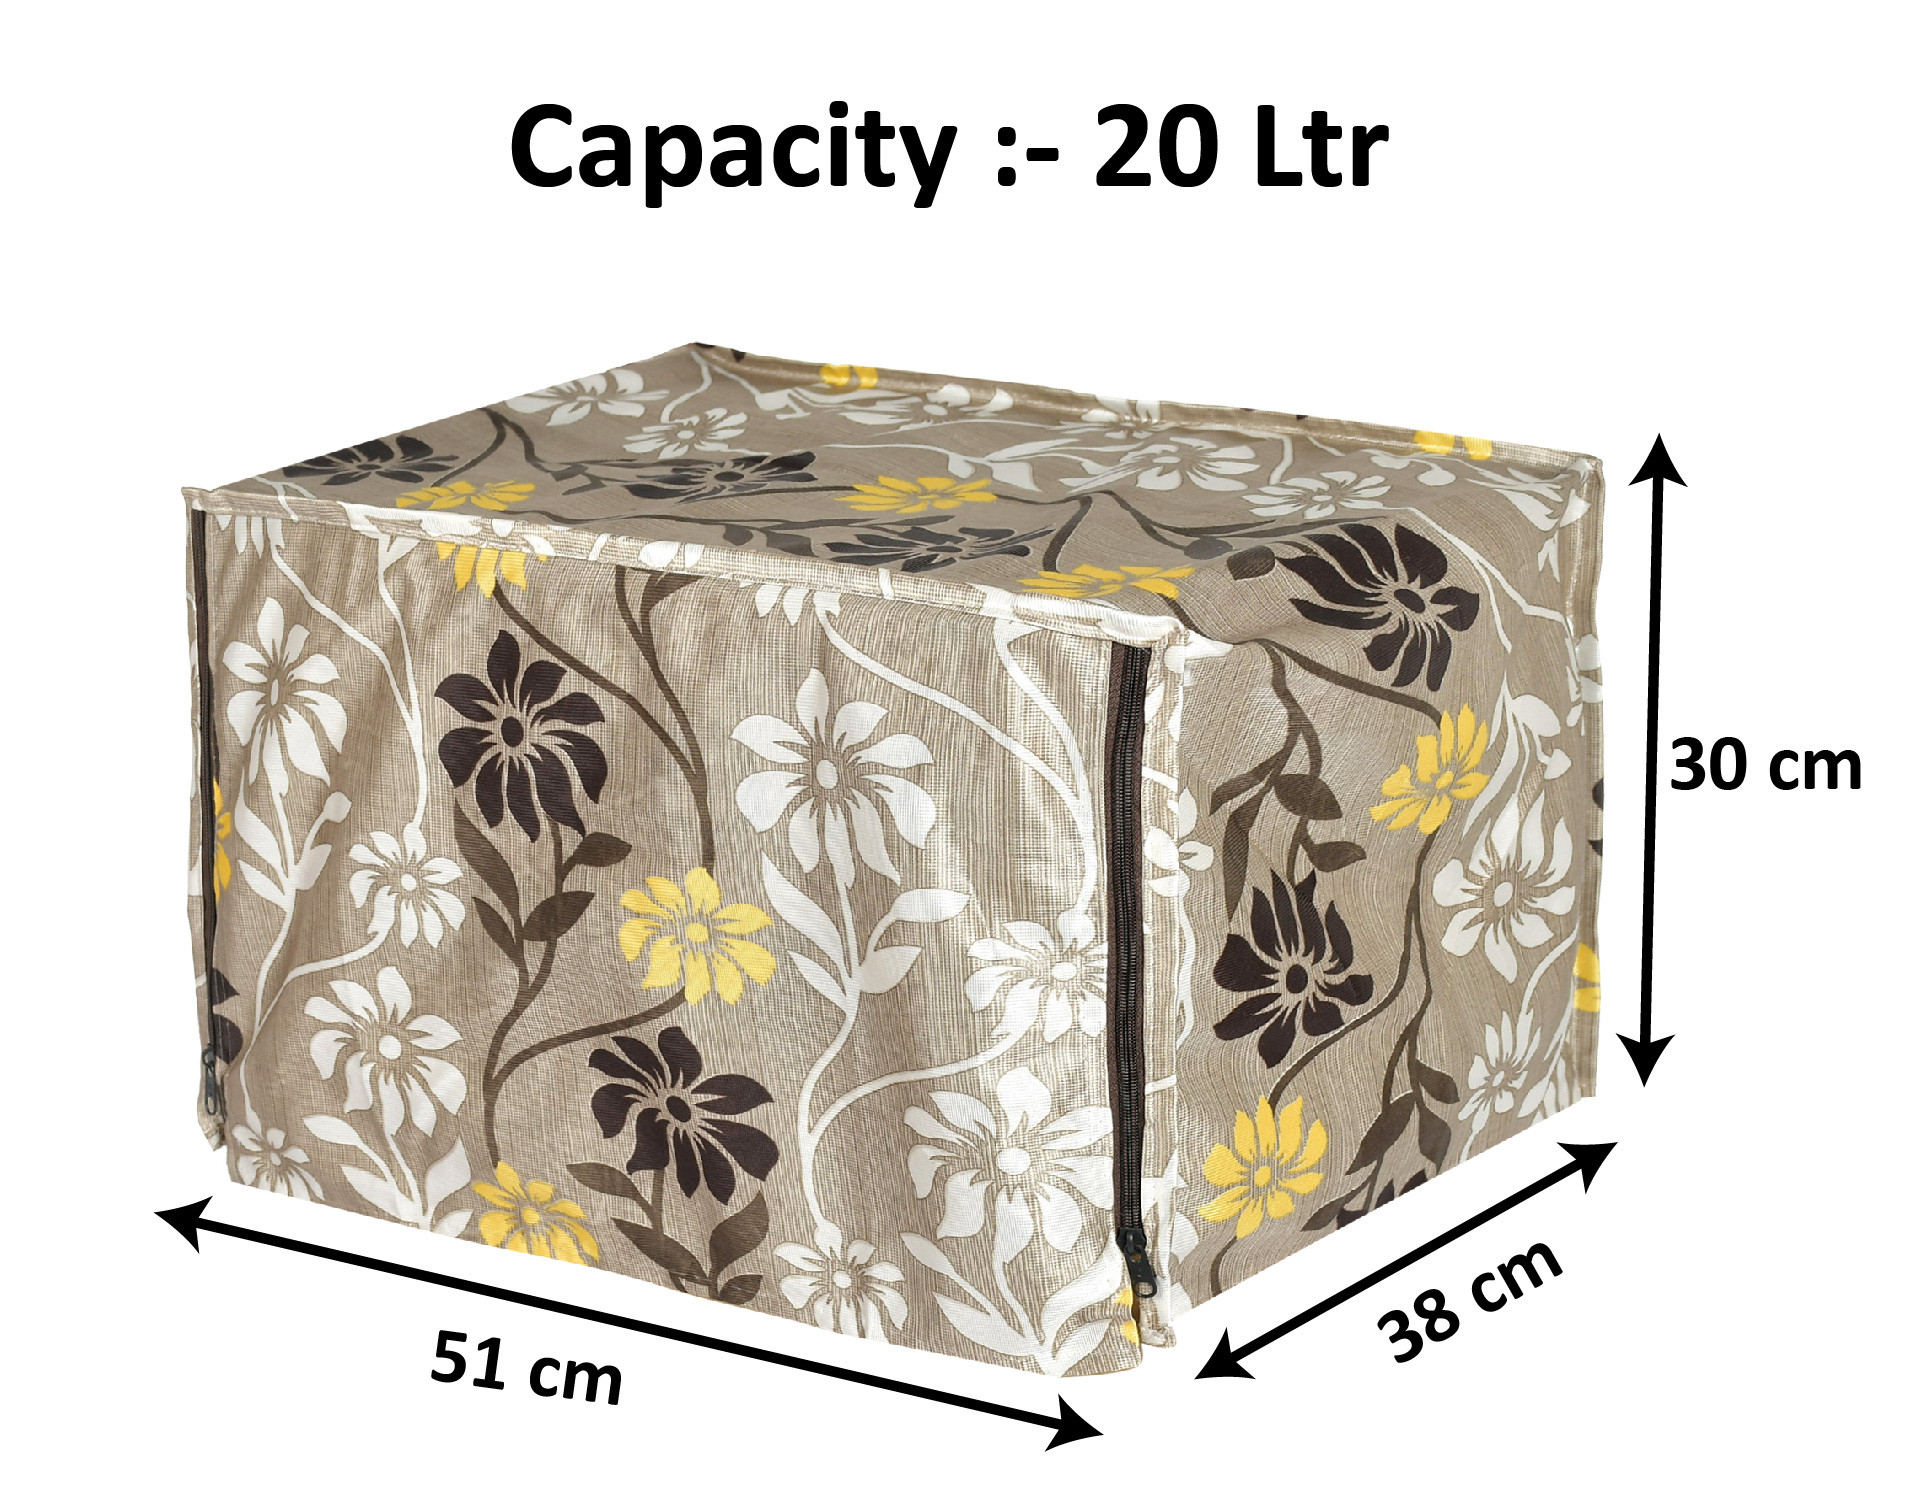 Kuber Industries Polyster Flower Printed Microwave Oven Cover,20 Ltr. (Brown)-HS43KUBMART25913